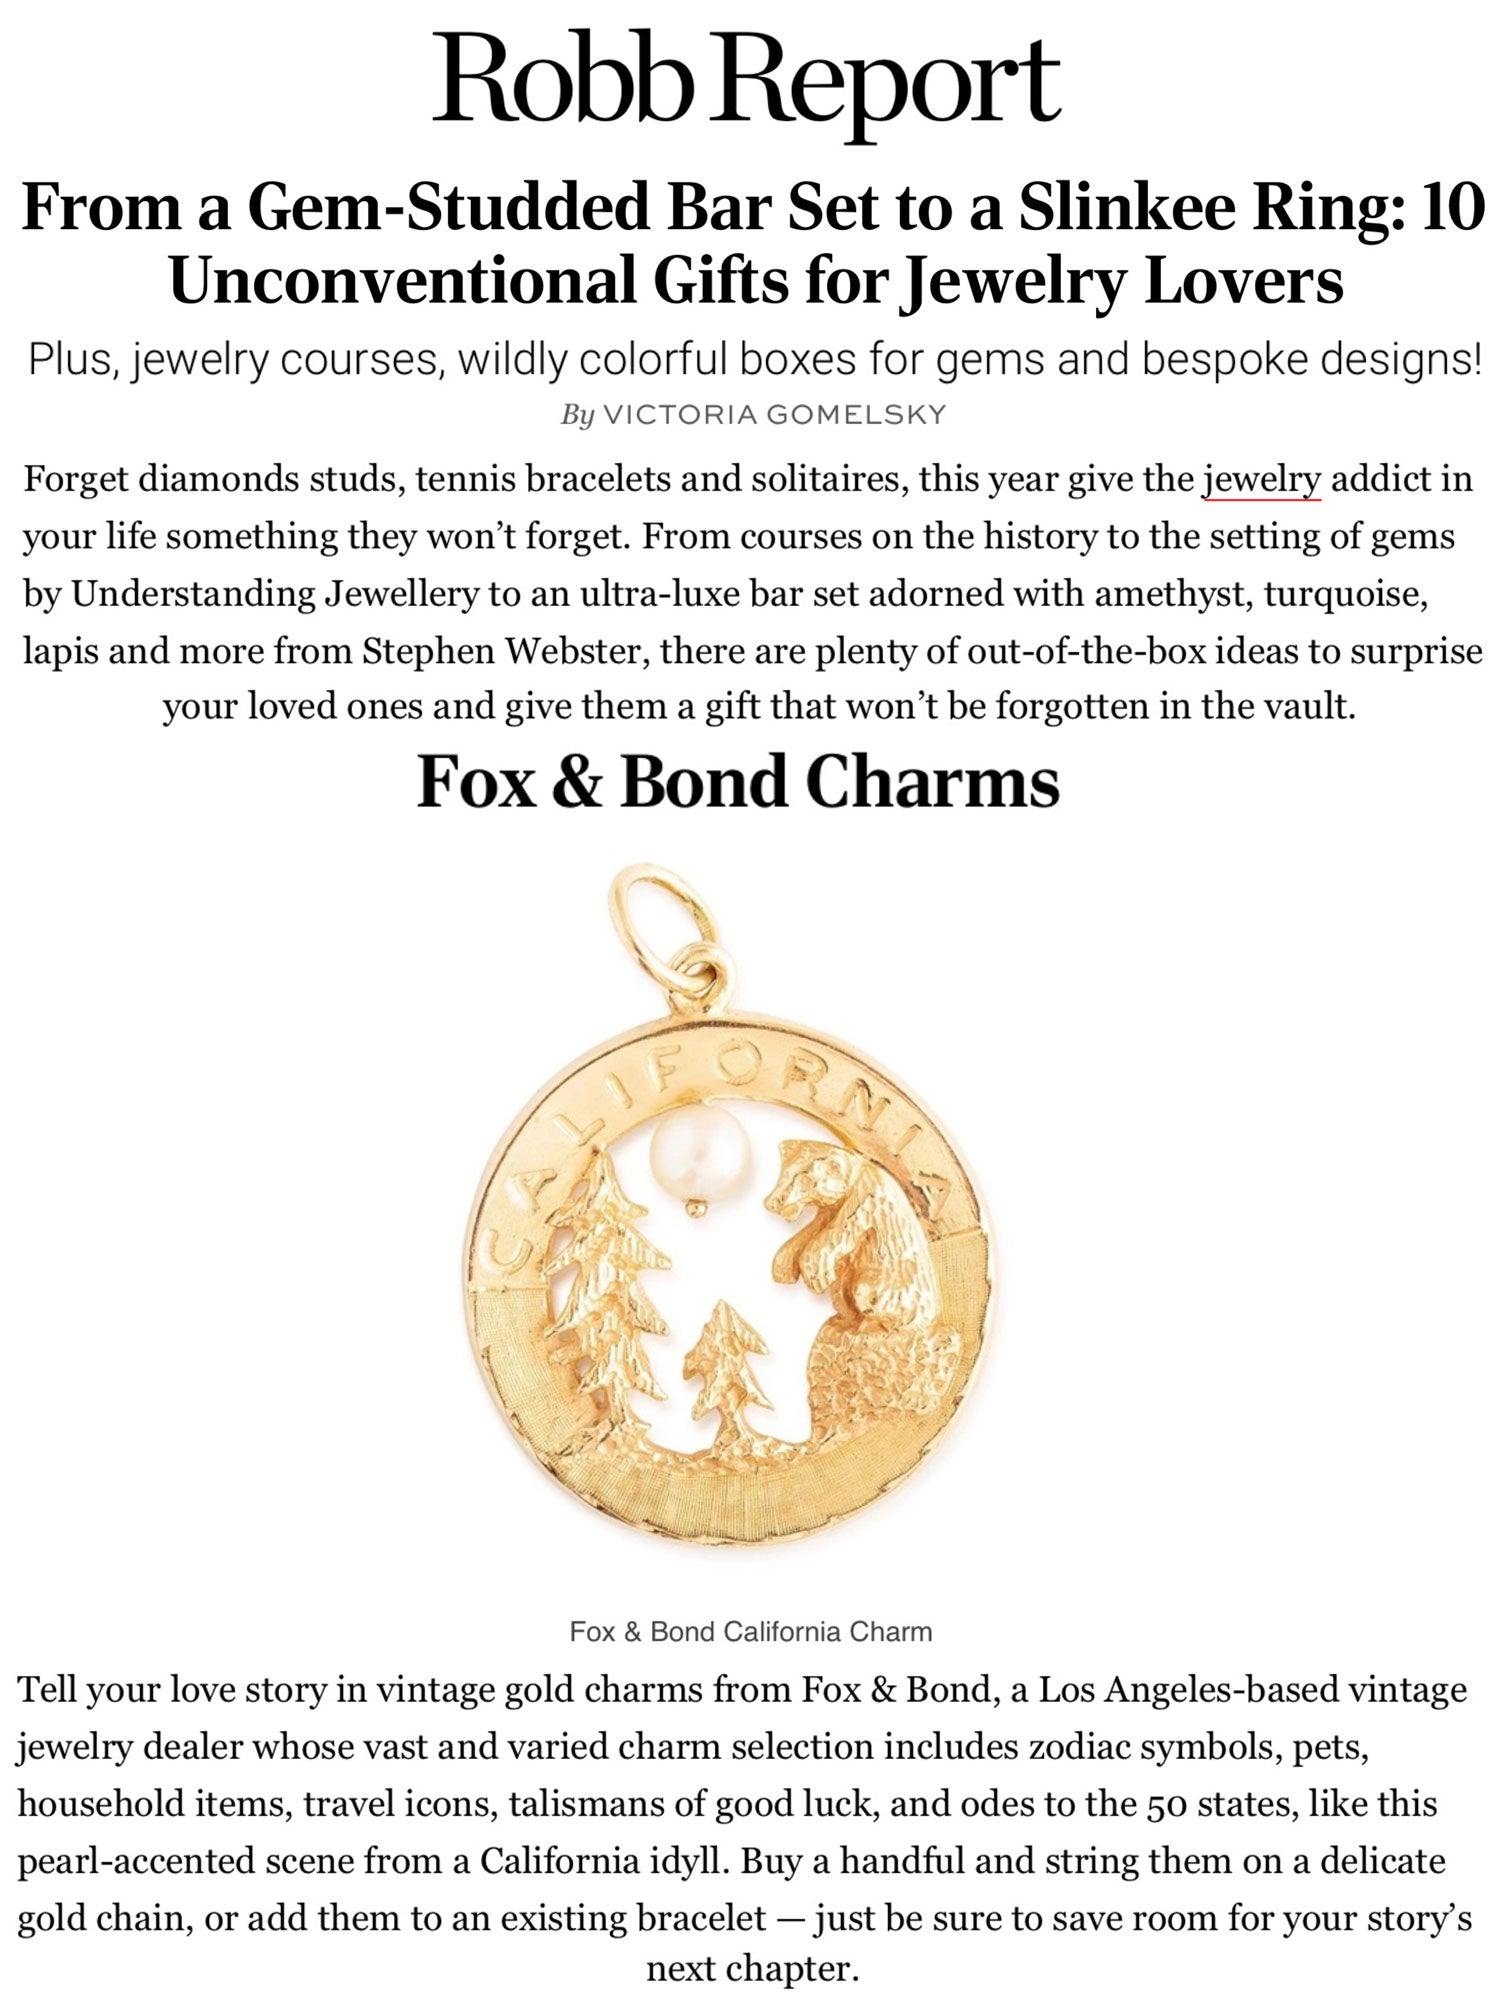 Robb Report: 10 Unconventional Gifts for Jewelry Lovers